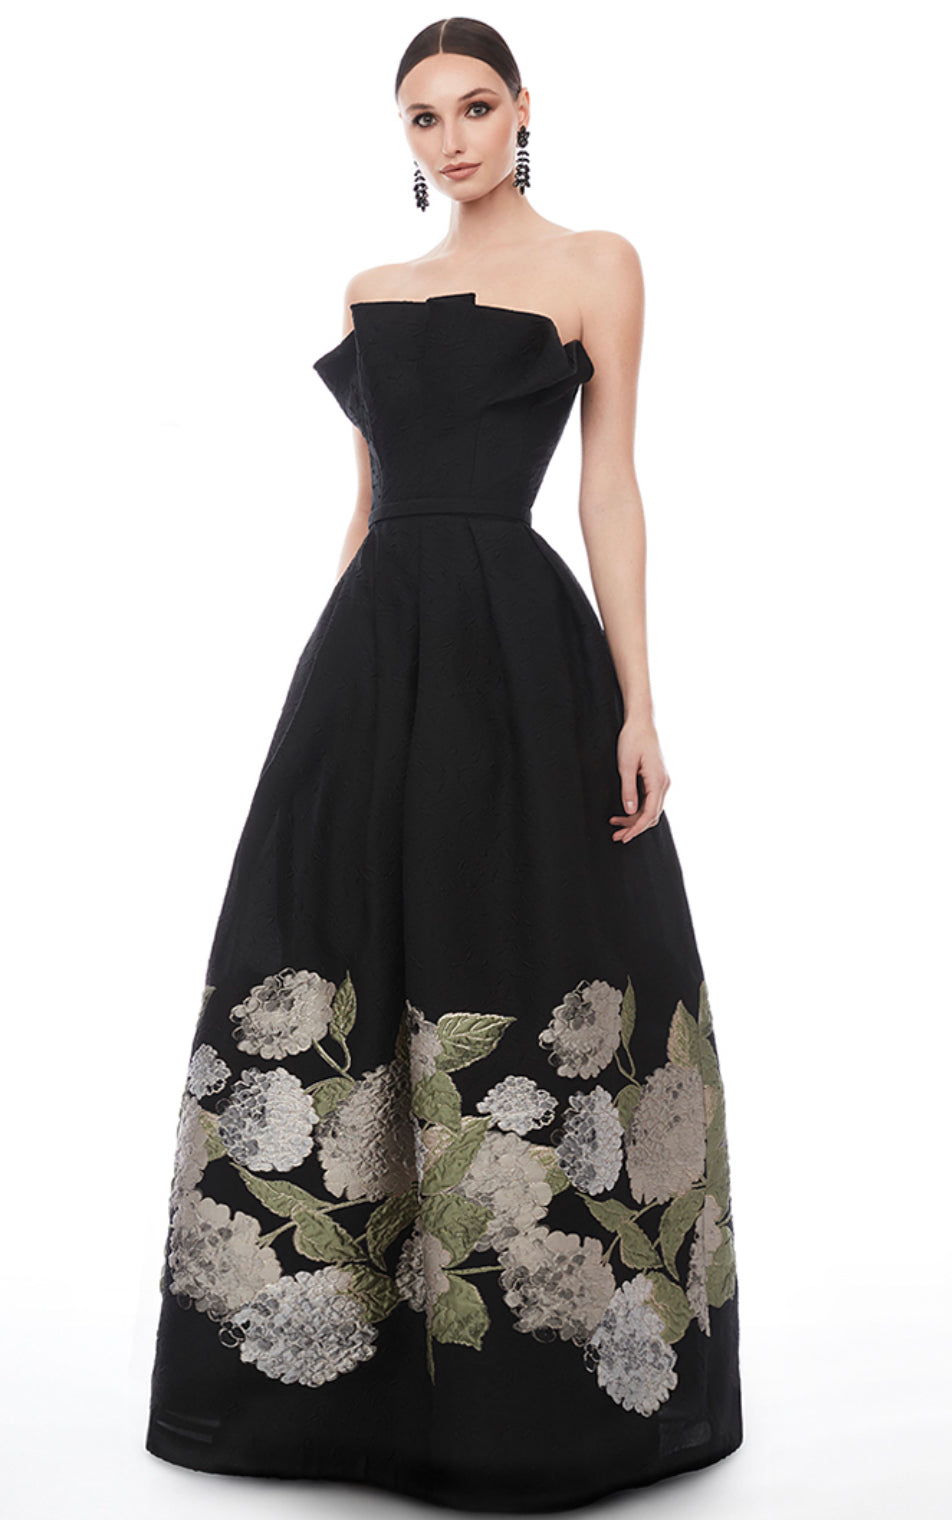 Frascara F4344 Strapless Ball Gown with Hydrangea Print